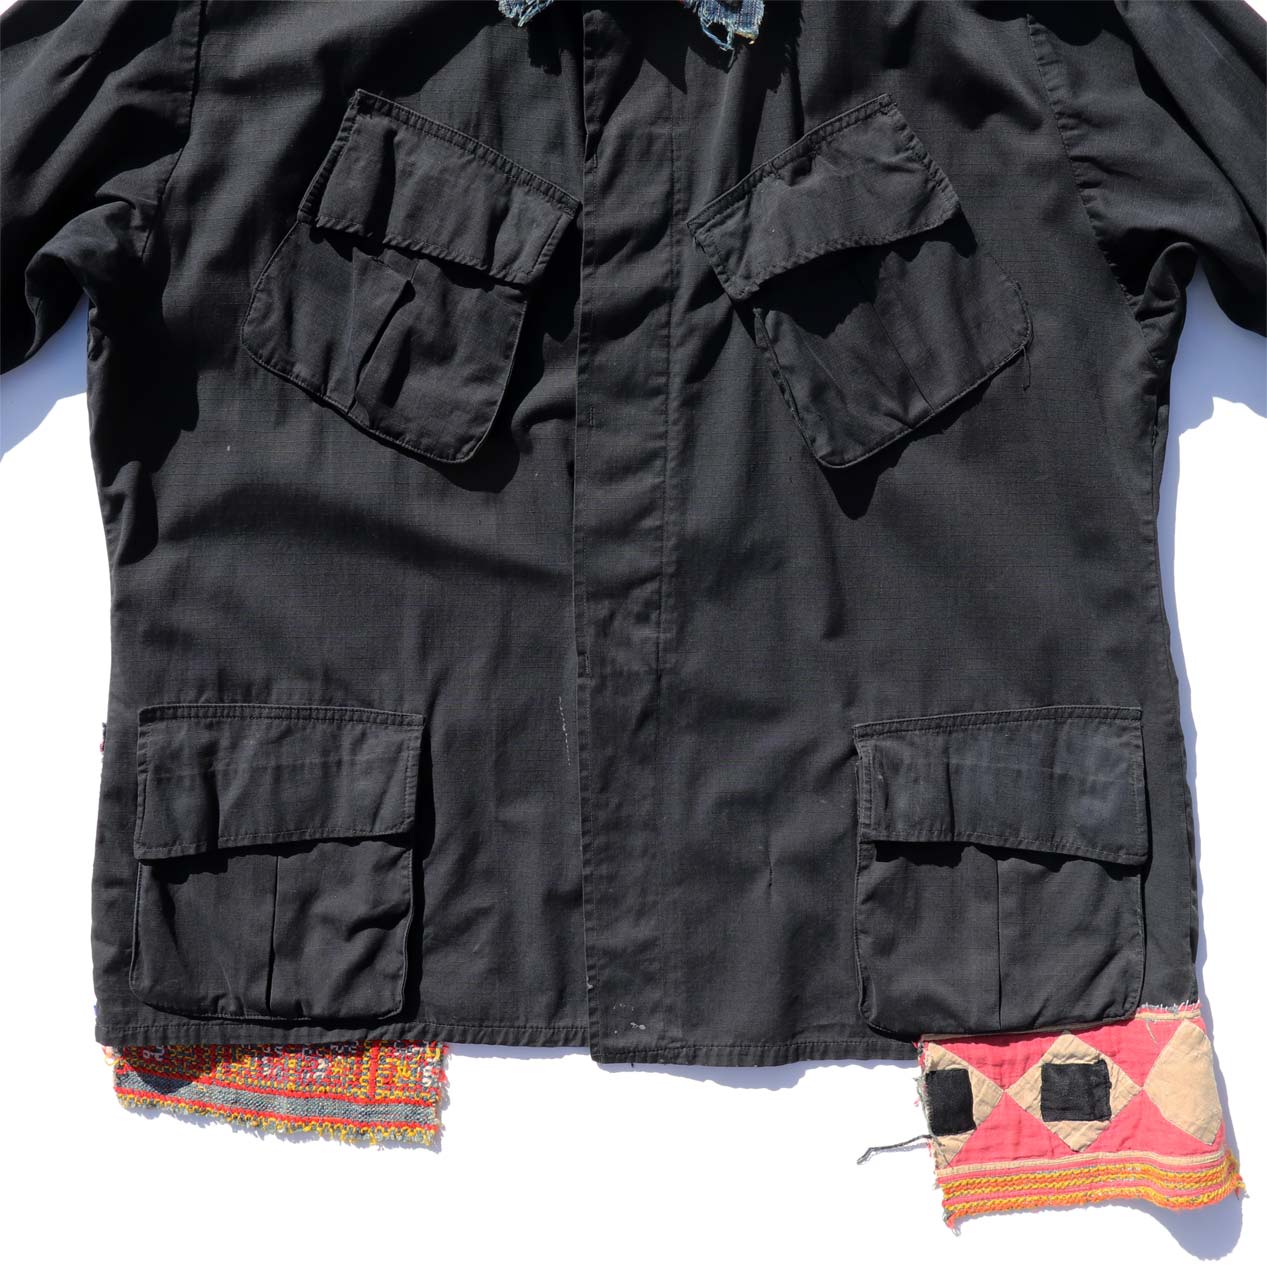 POST JUNK / 00's UNDERCOVER “SCAB / ONE OFF” Black-Dye Customized